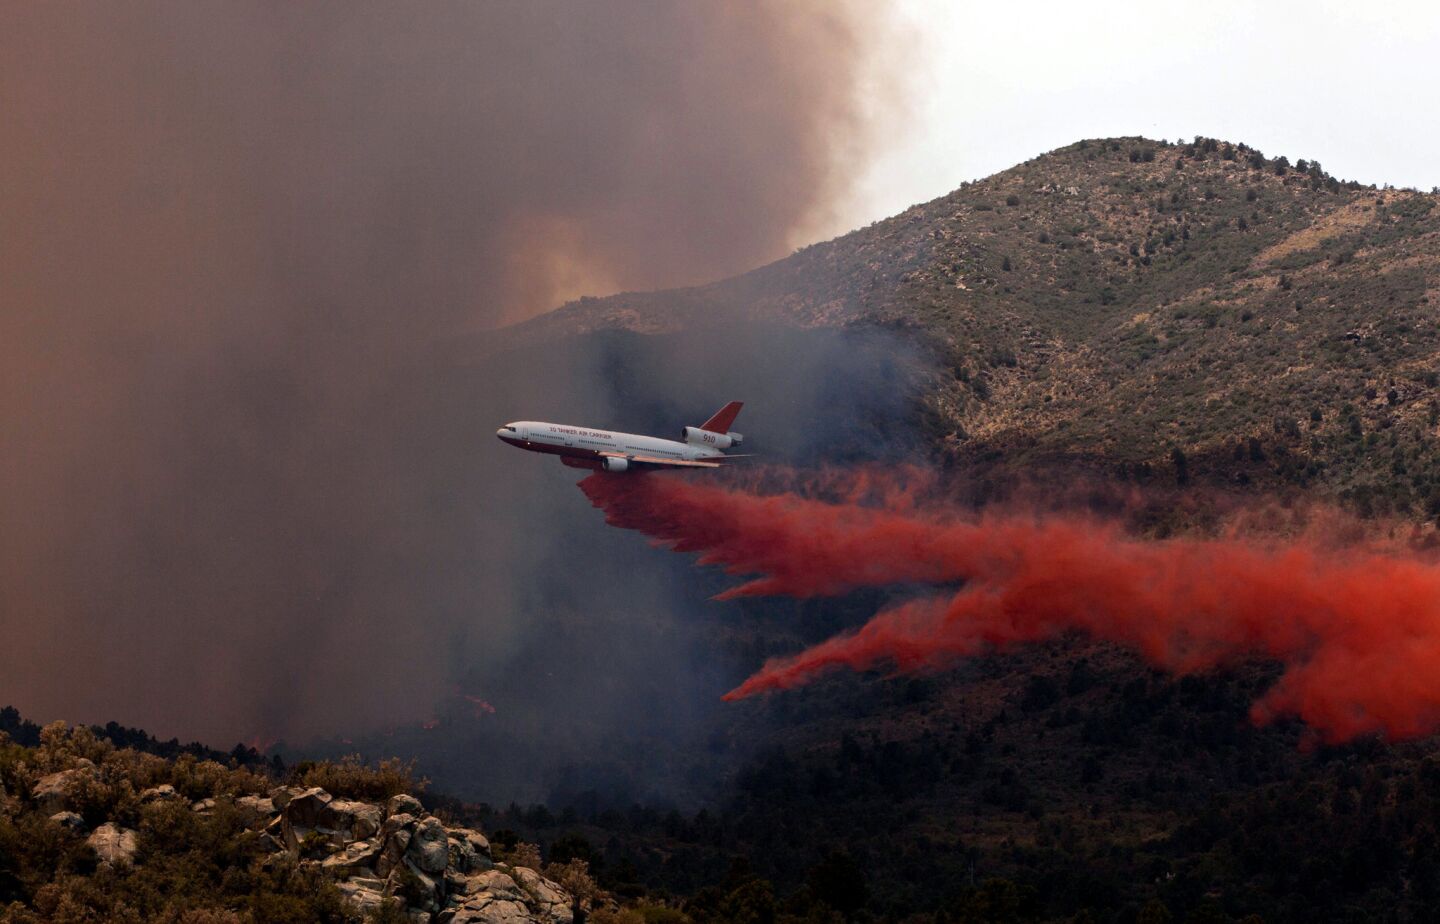 Tanker 910 makes a retardant drop on the Yarnell Hill fire to help protect the Double Bar A Ranch near Peeples Valley, Ariz.